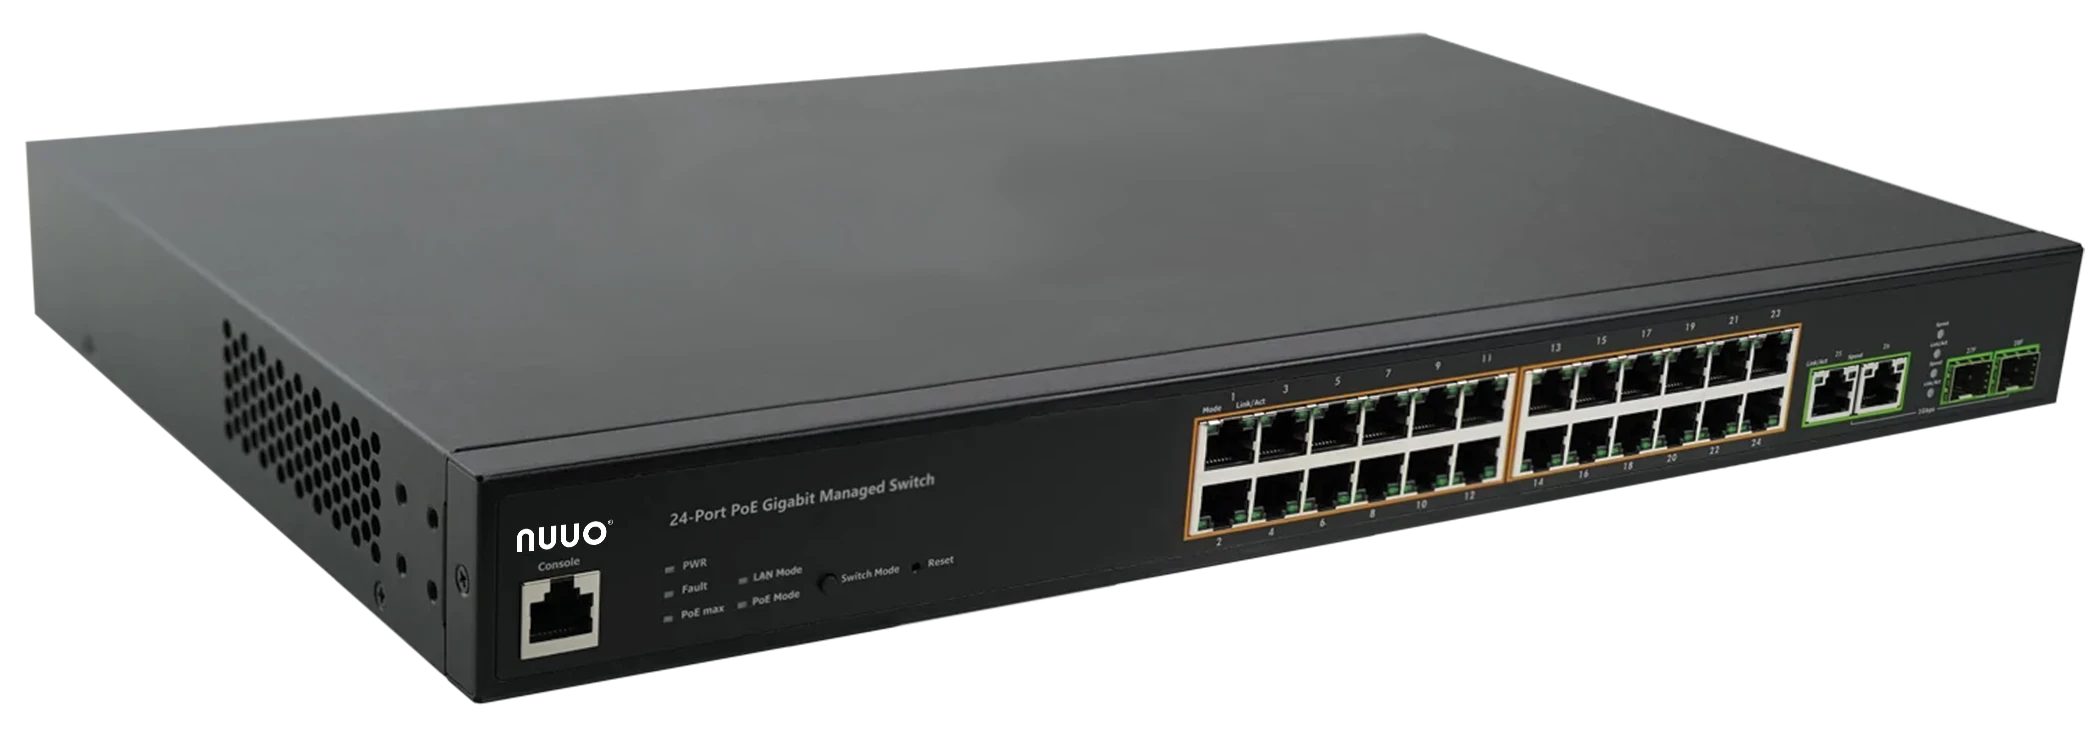 2272-n24poe-switch-product-image-front-tilt-1688077481121.png